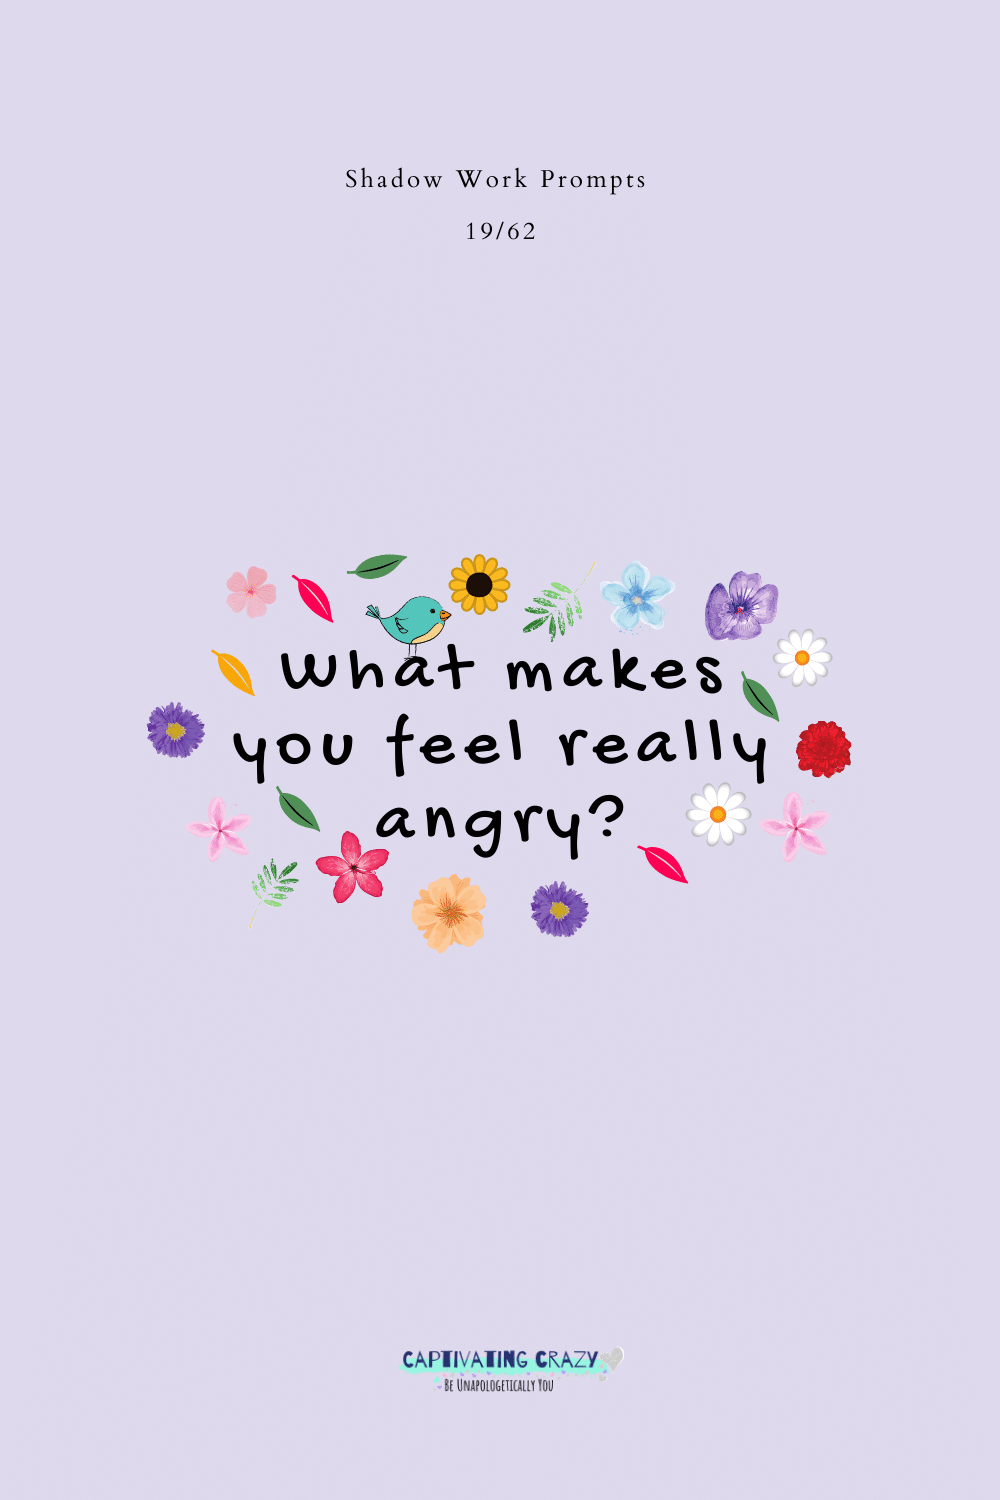 What makes you feel really angry?